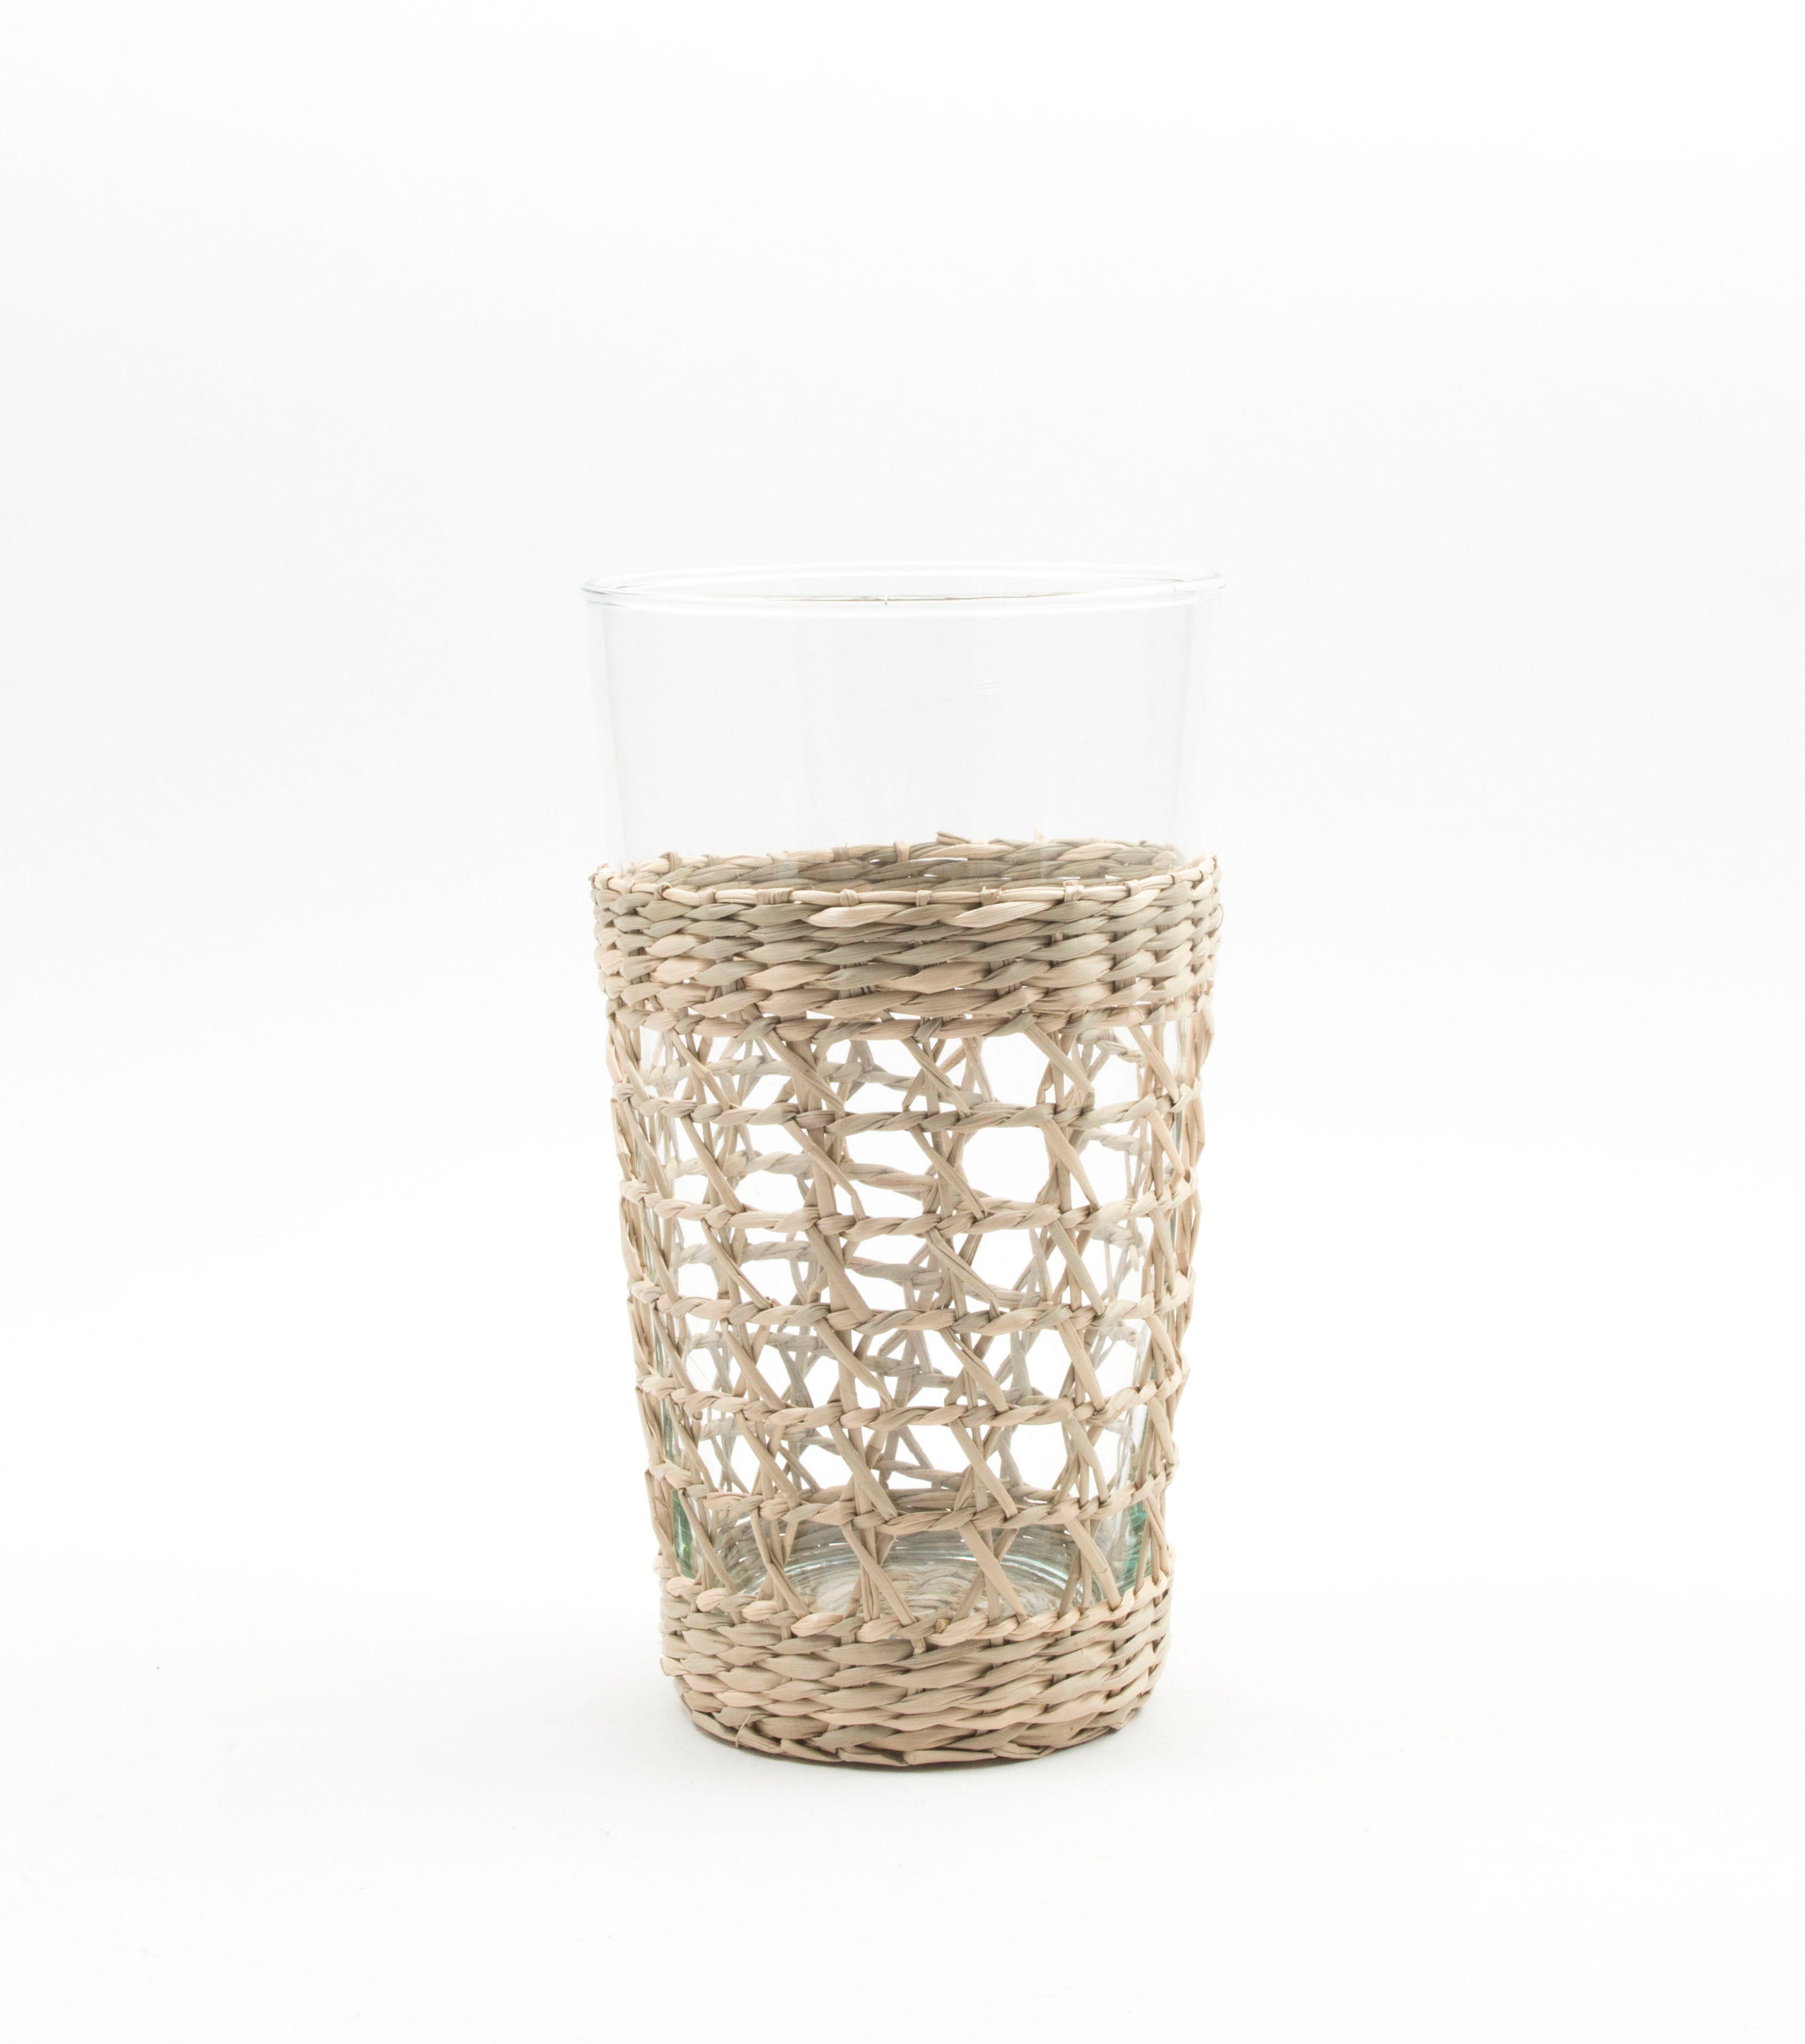 Seagrass Cage Highball Glass Seagrass Brand_Seagrass & Rattan Champagne Flutes Cocktail Kitchen_Drinkware MG_2130_OFFER